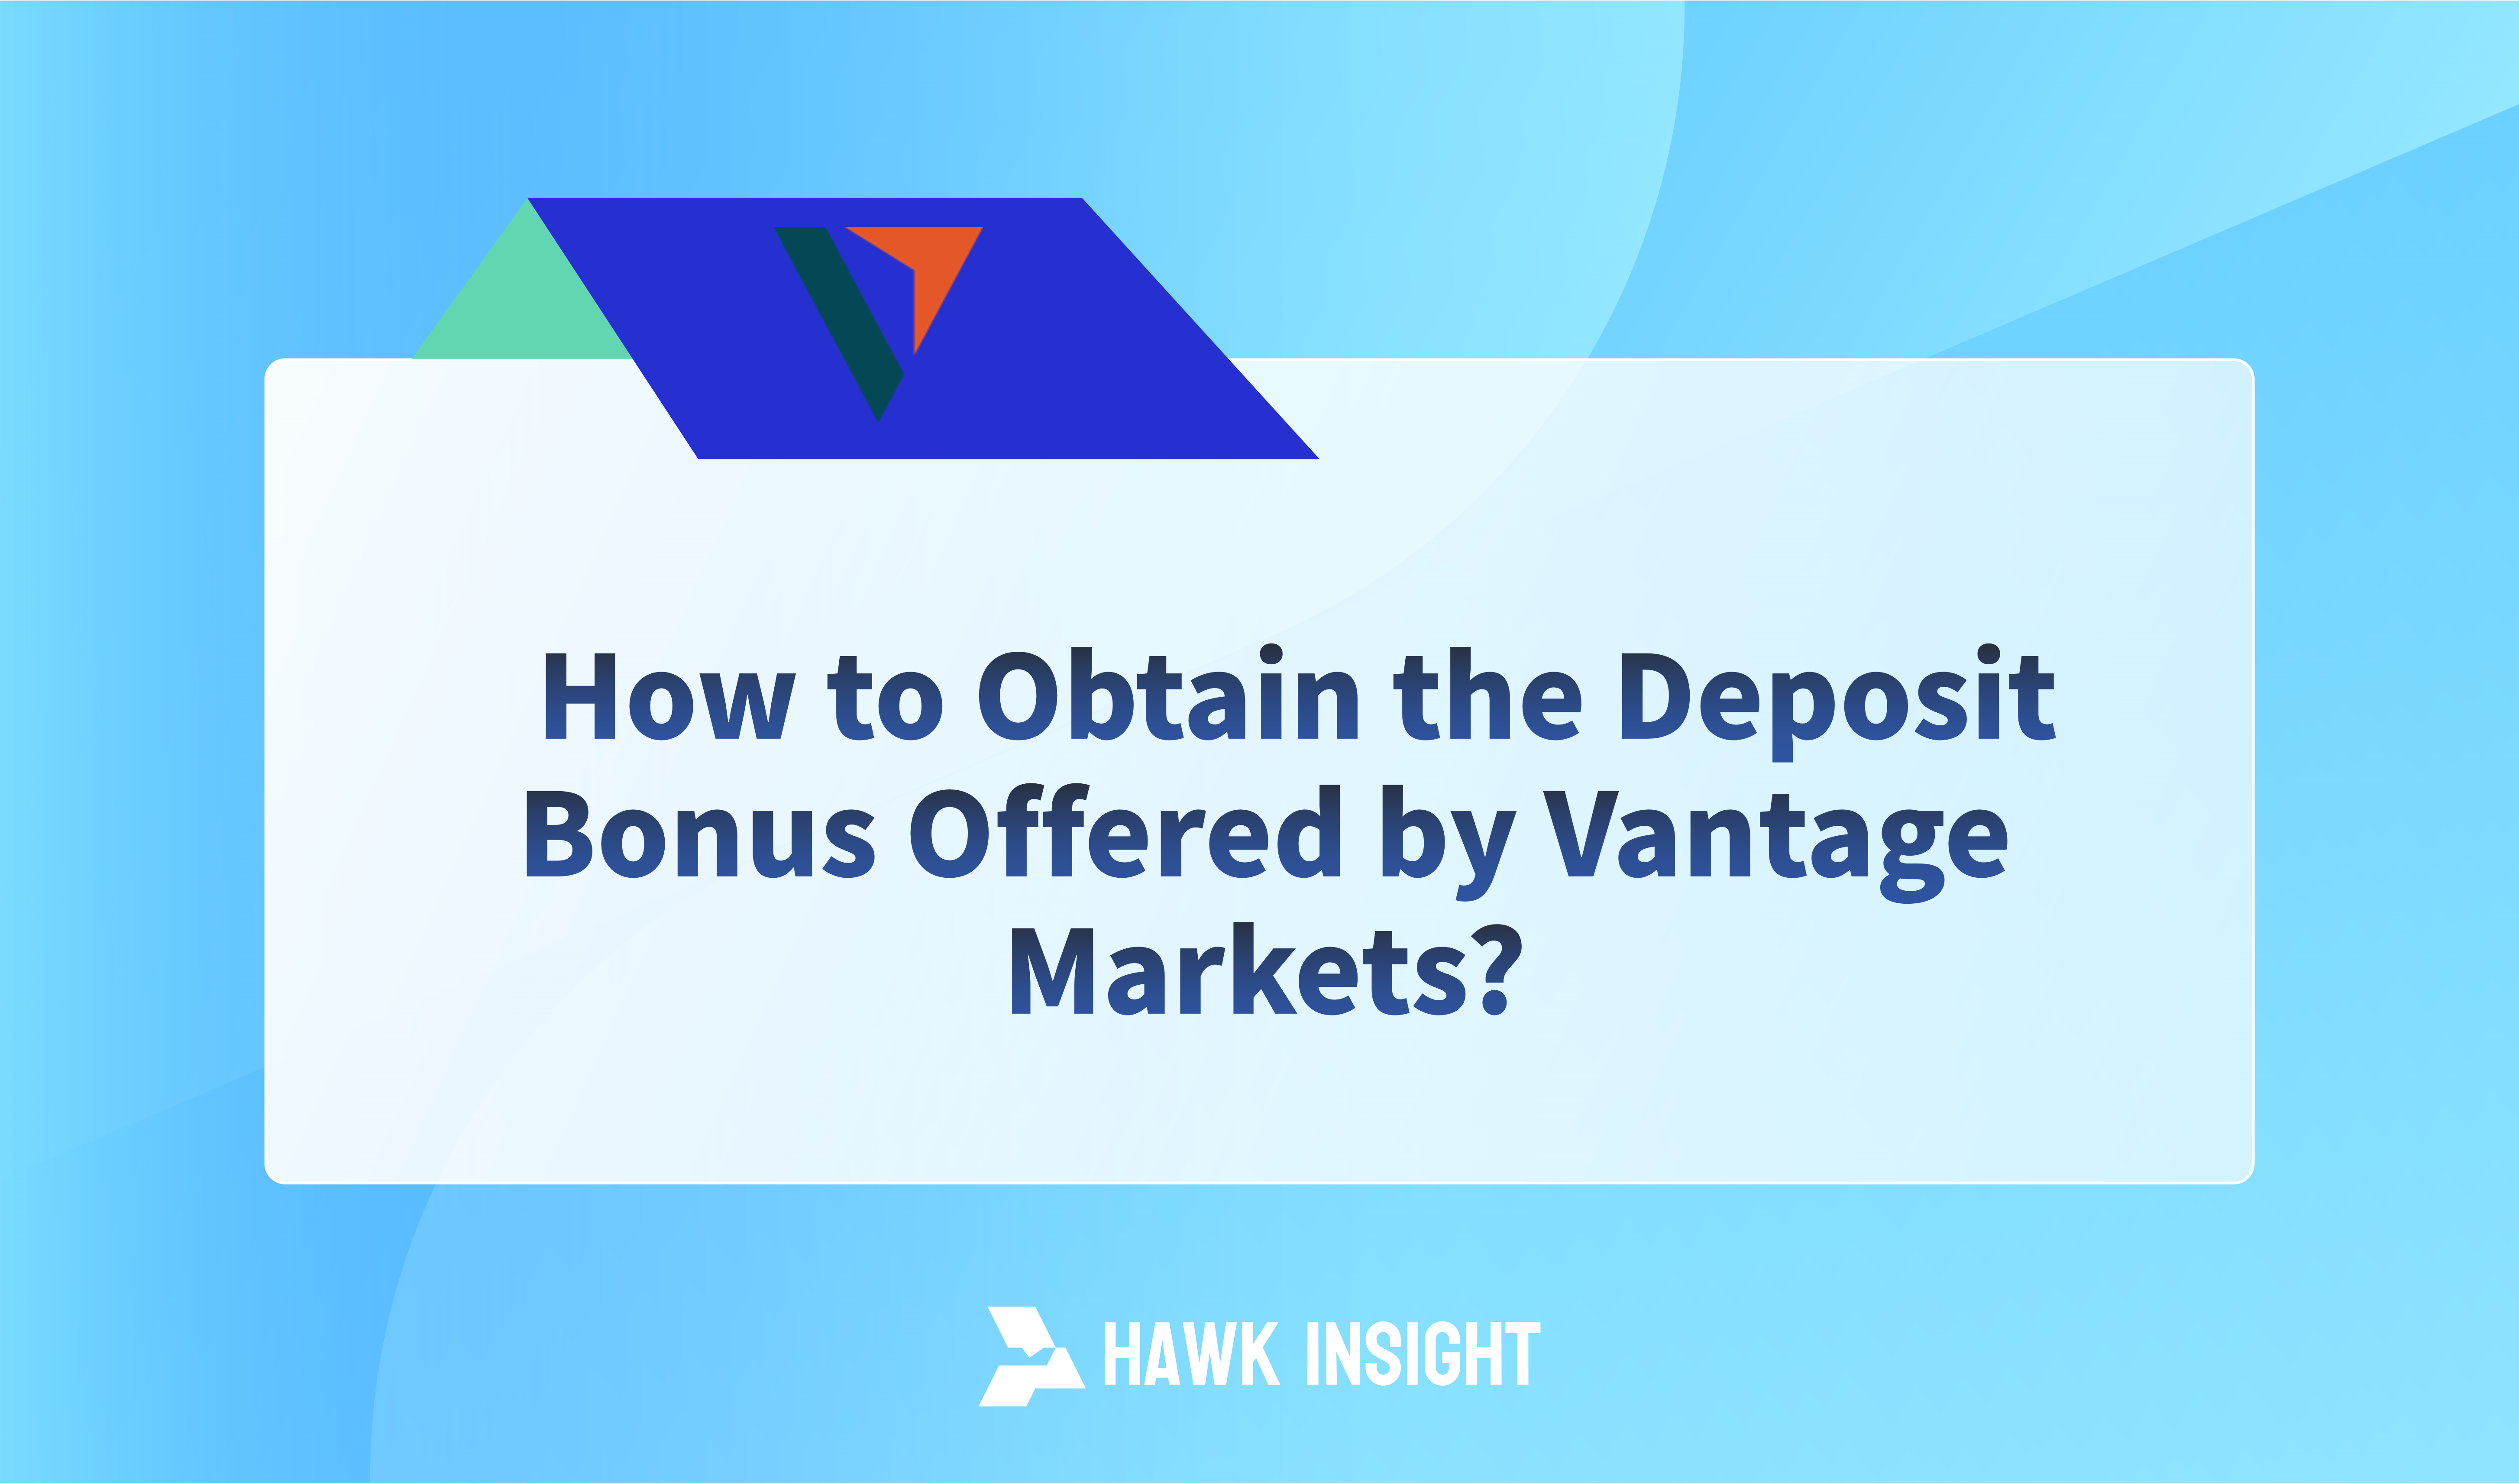 How to Obtain the Deposit Bonus Offered by Vantage Markets?